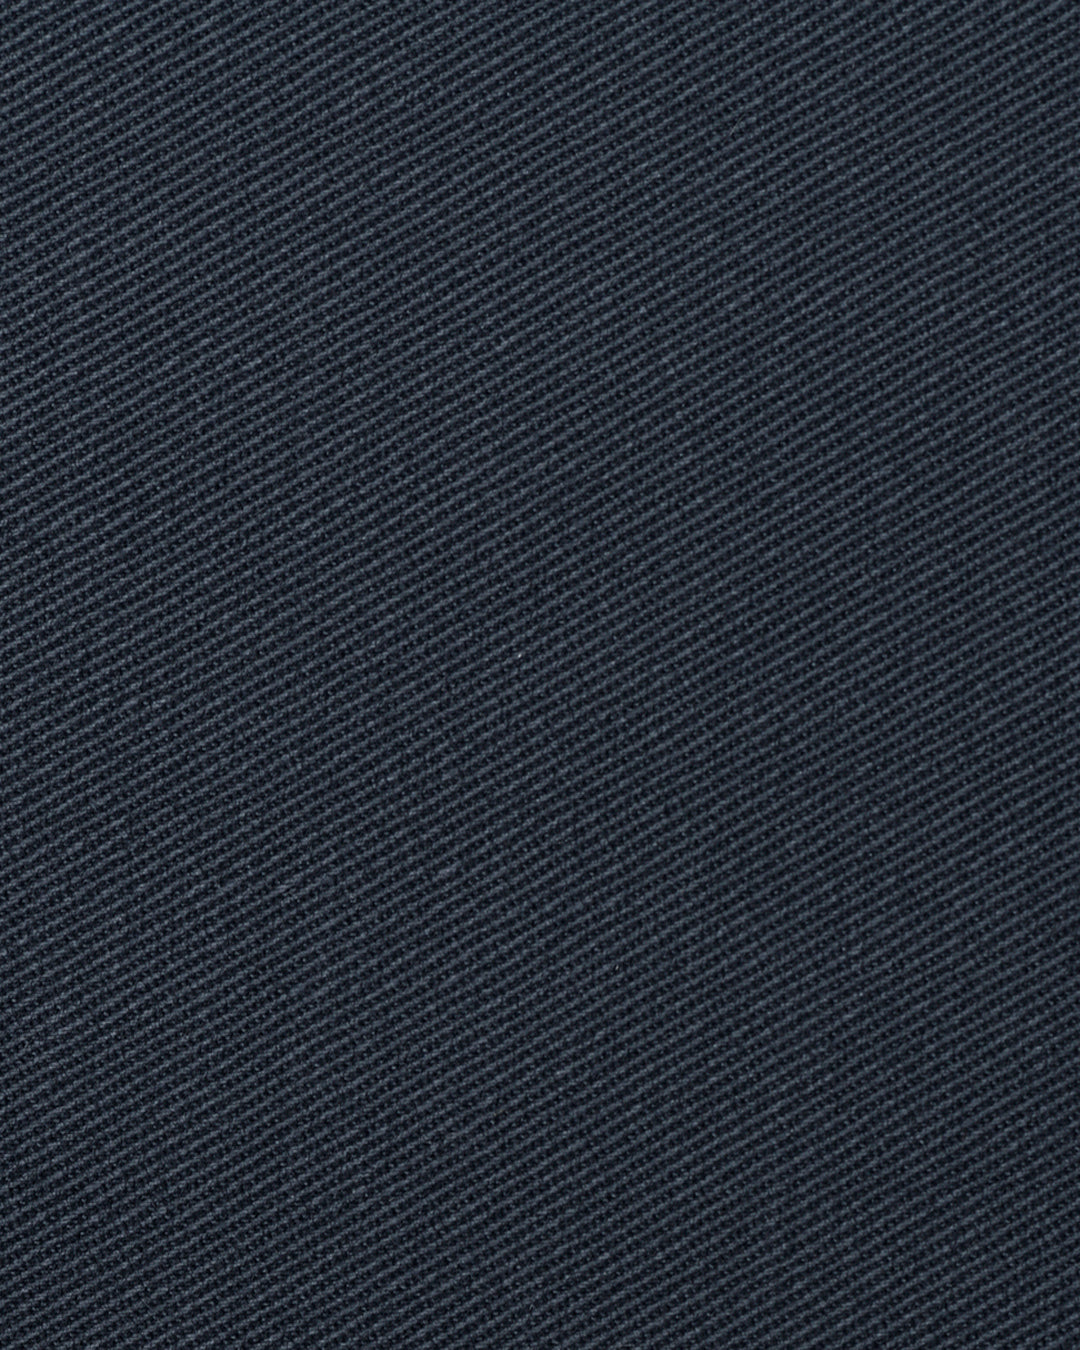 Closeup view of custom Genoa Chino pants for men by Luxire in dark teal blue